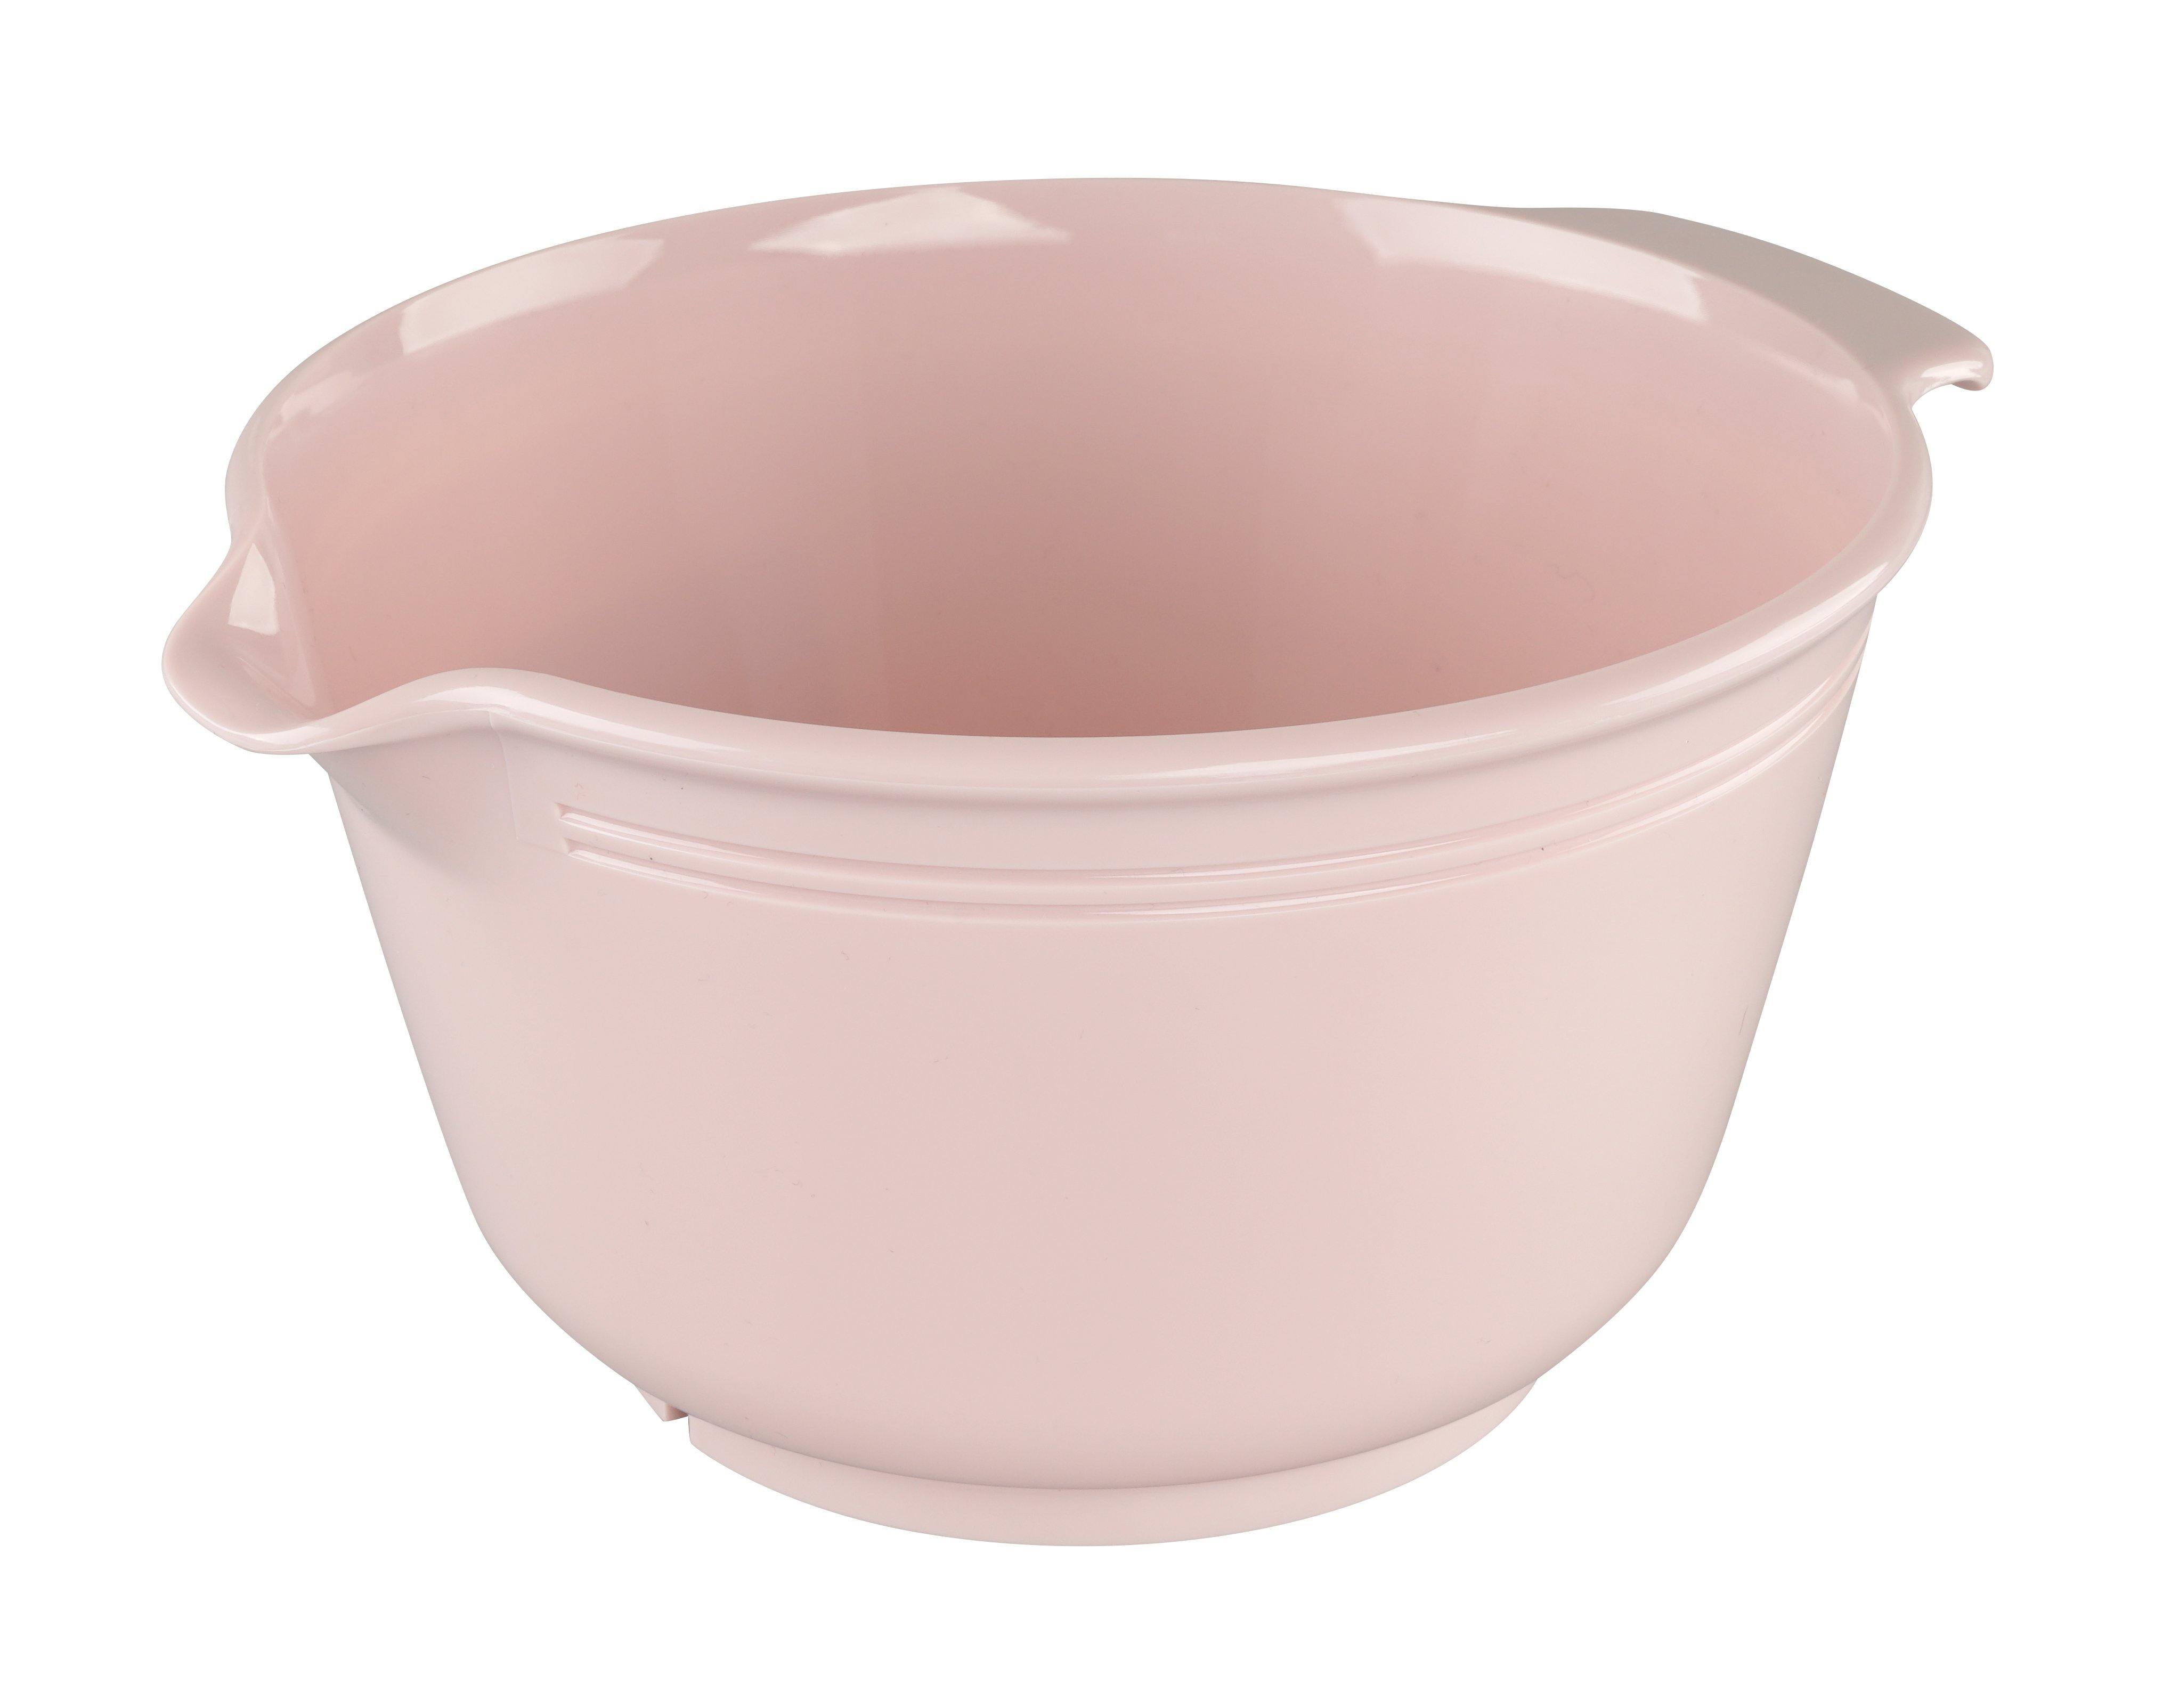 Dr. Oetker "Retro" Mixing Bowl, Rose, 23X14 Cm, 3L - Whole and All